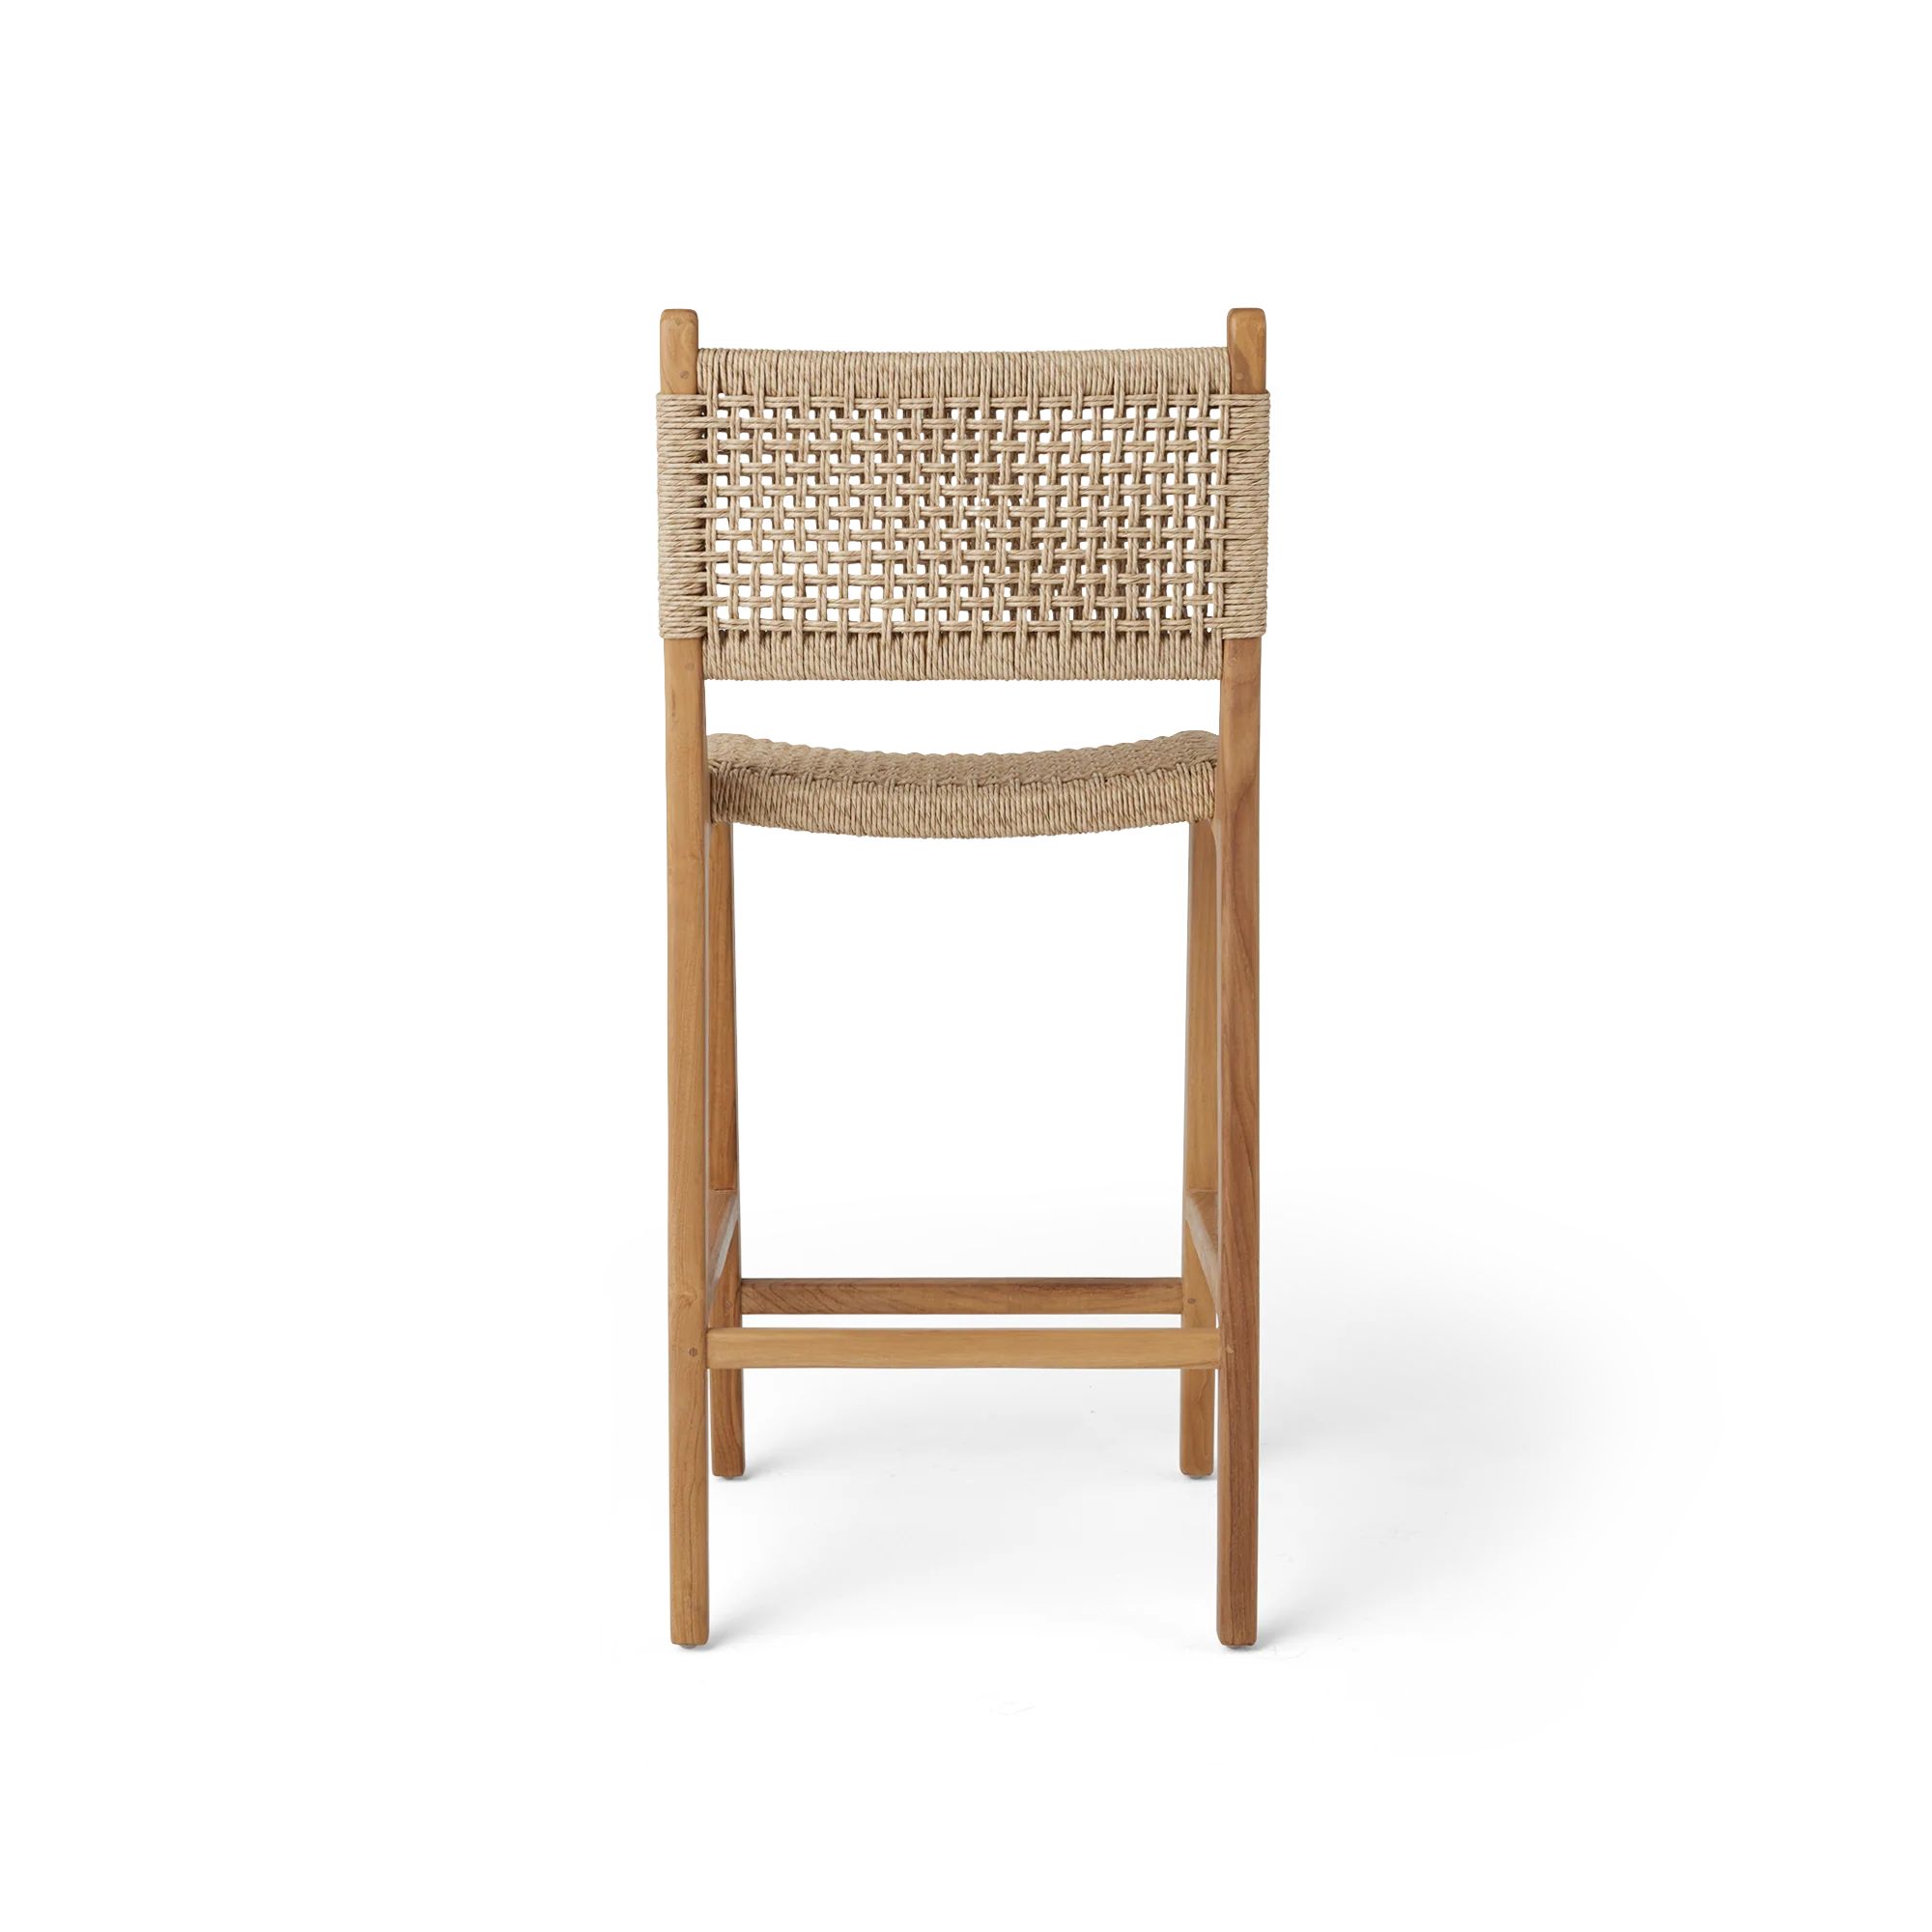 Stool #2 - Counter Stool in Teak with Synthetic Rattan | Hati Home